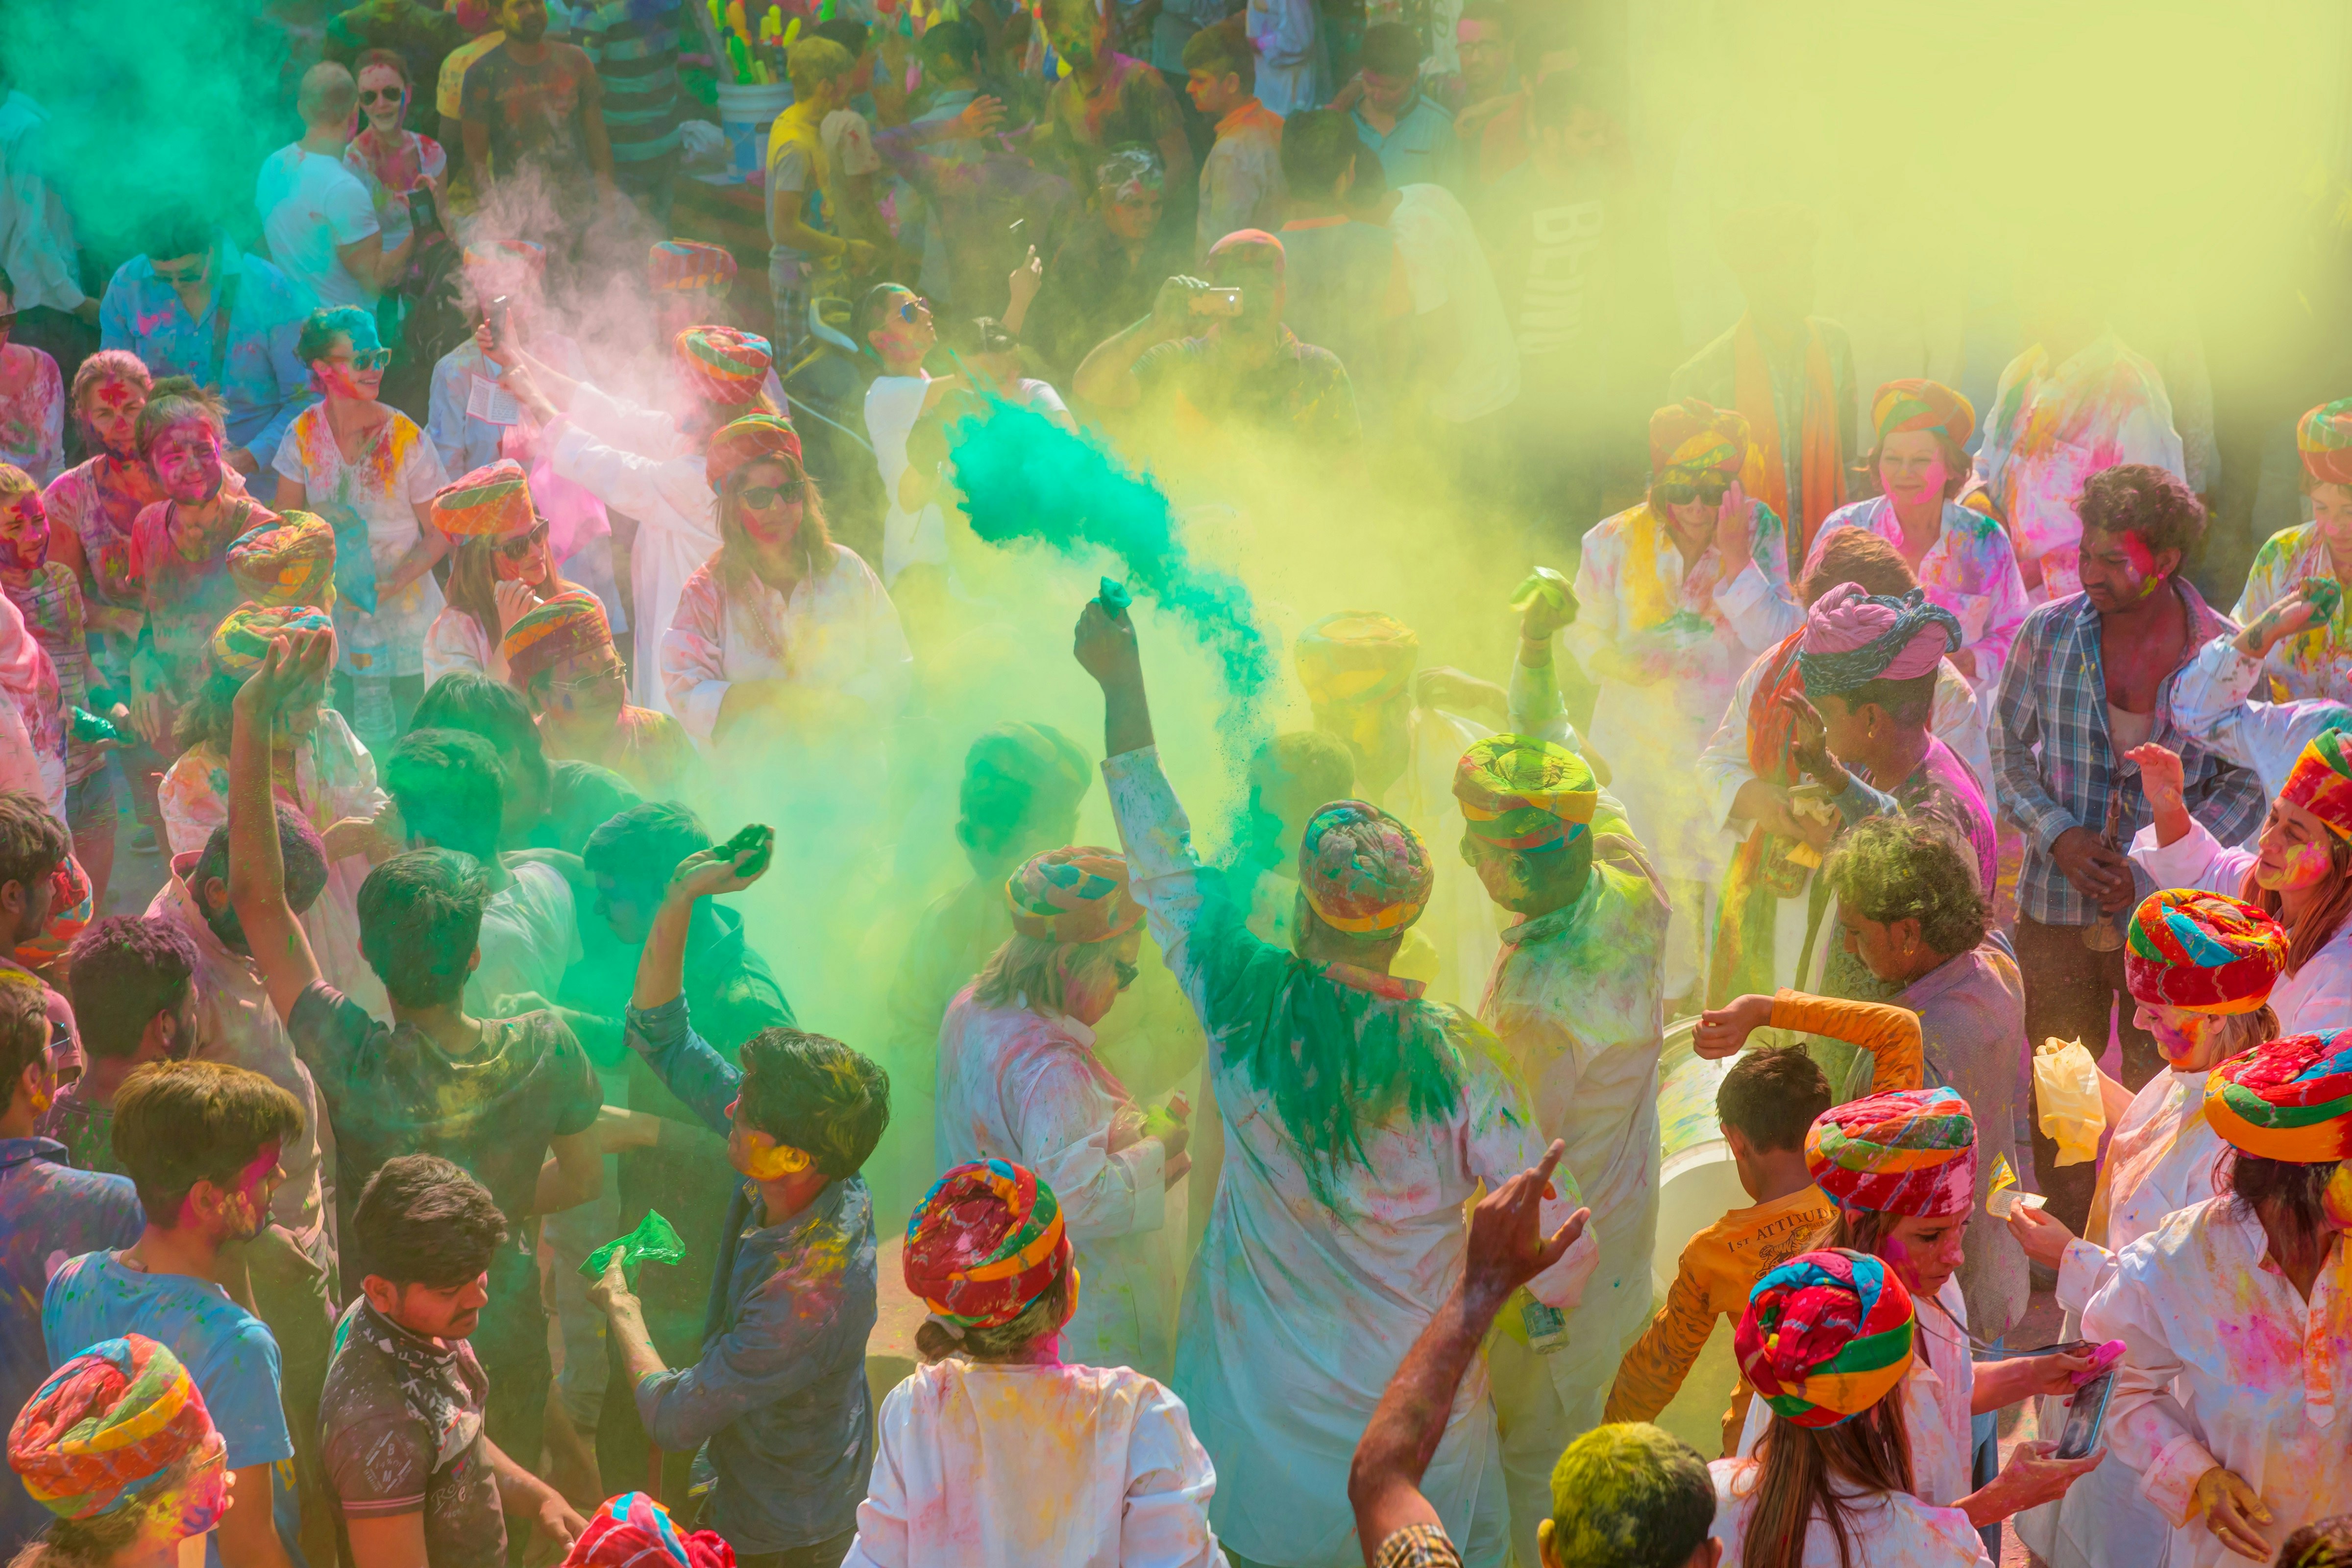 A group of tourists and locals throw around handfuls of colourful powder during Holi celebrations in Udaipur, India.